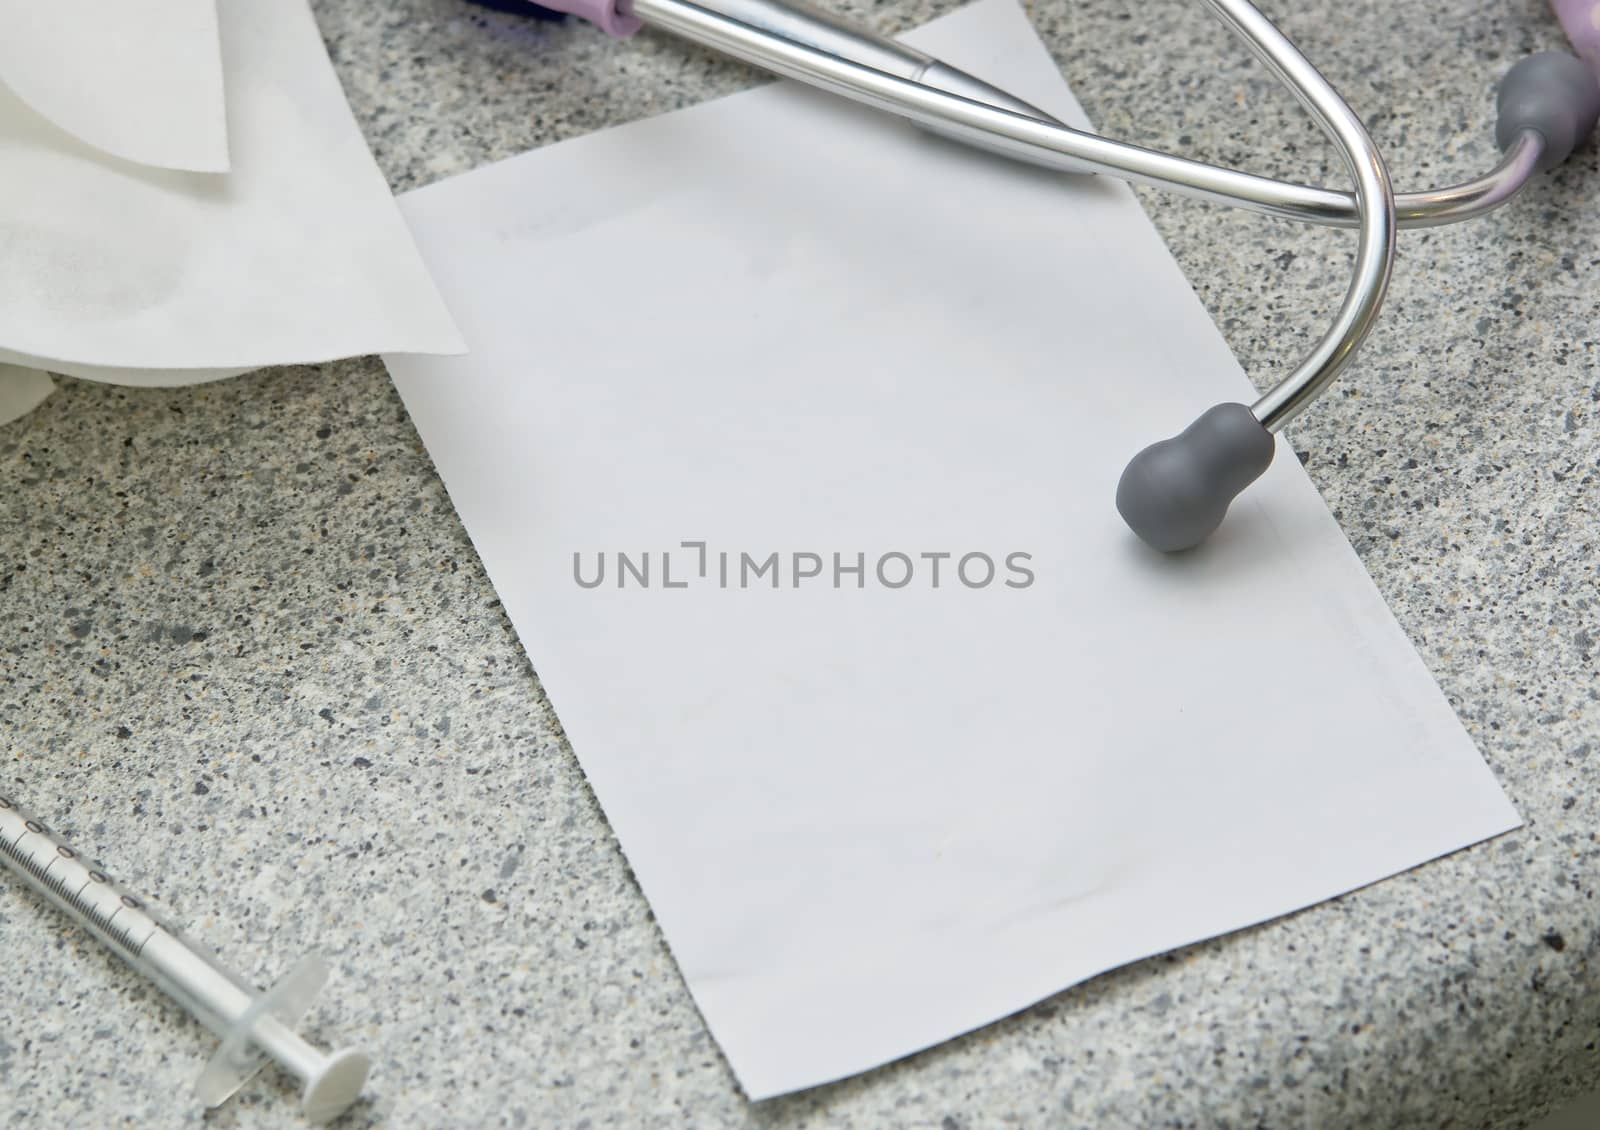 Stethoscope and blank paper for notes